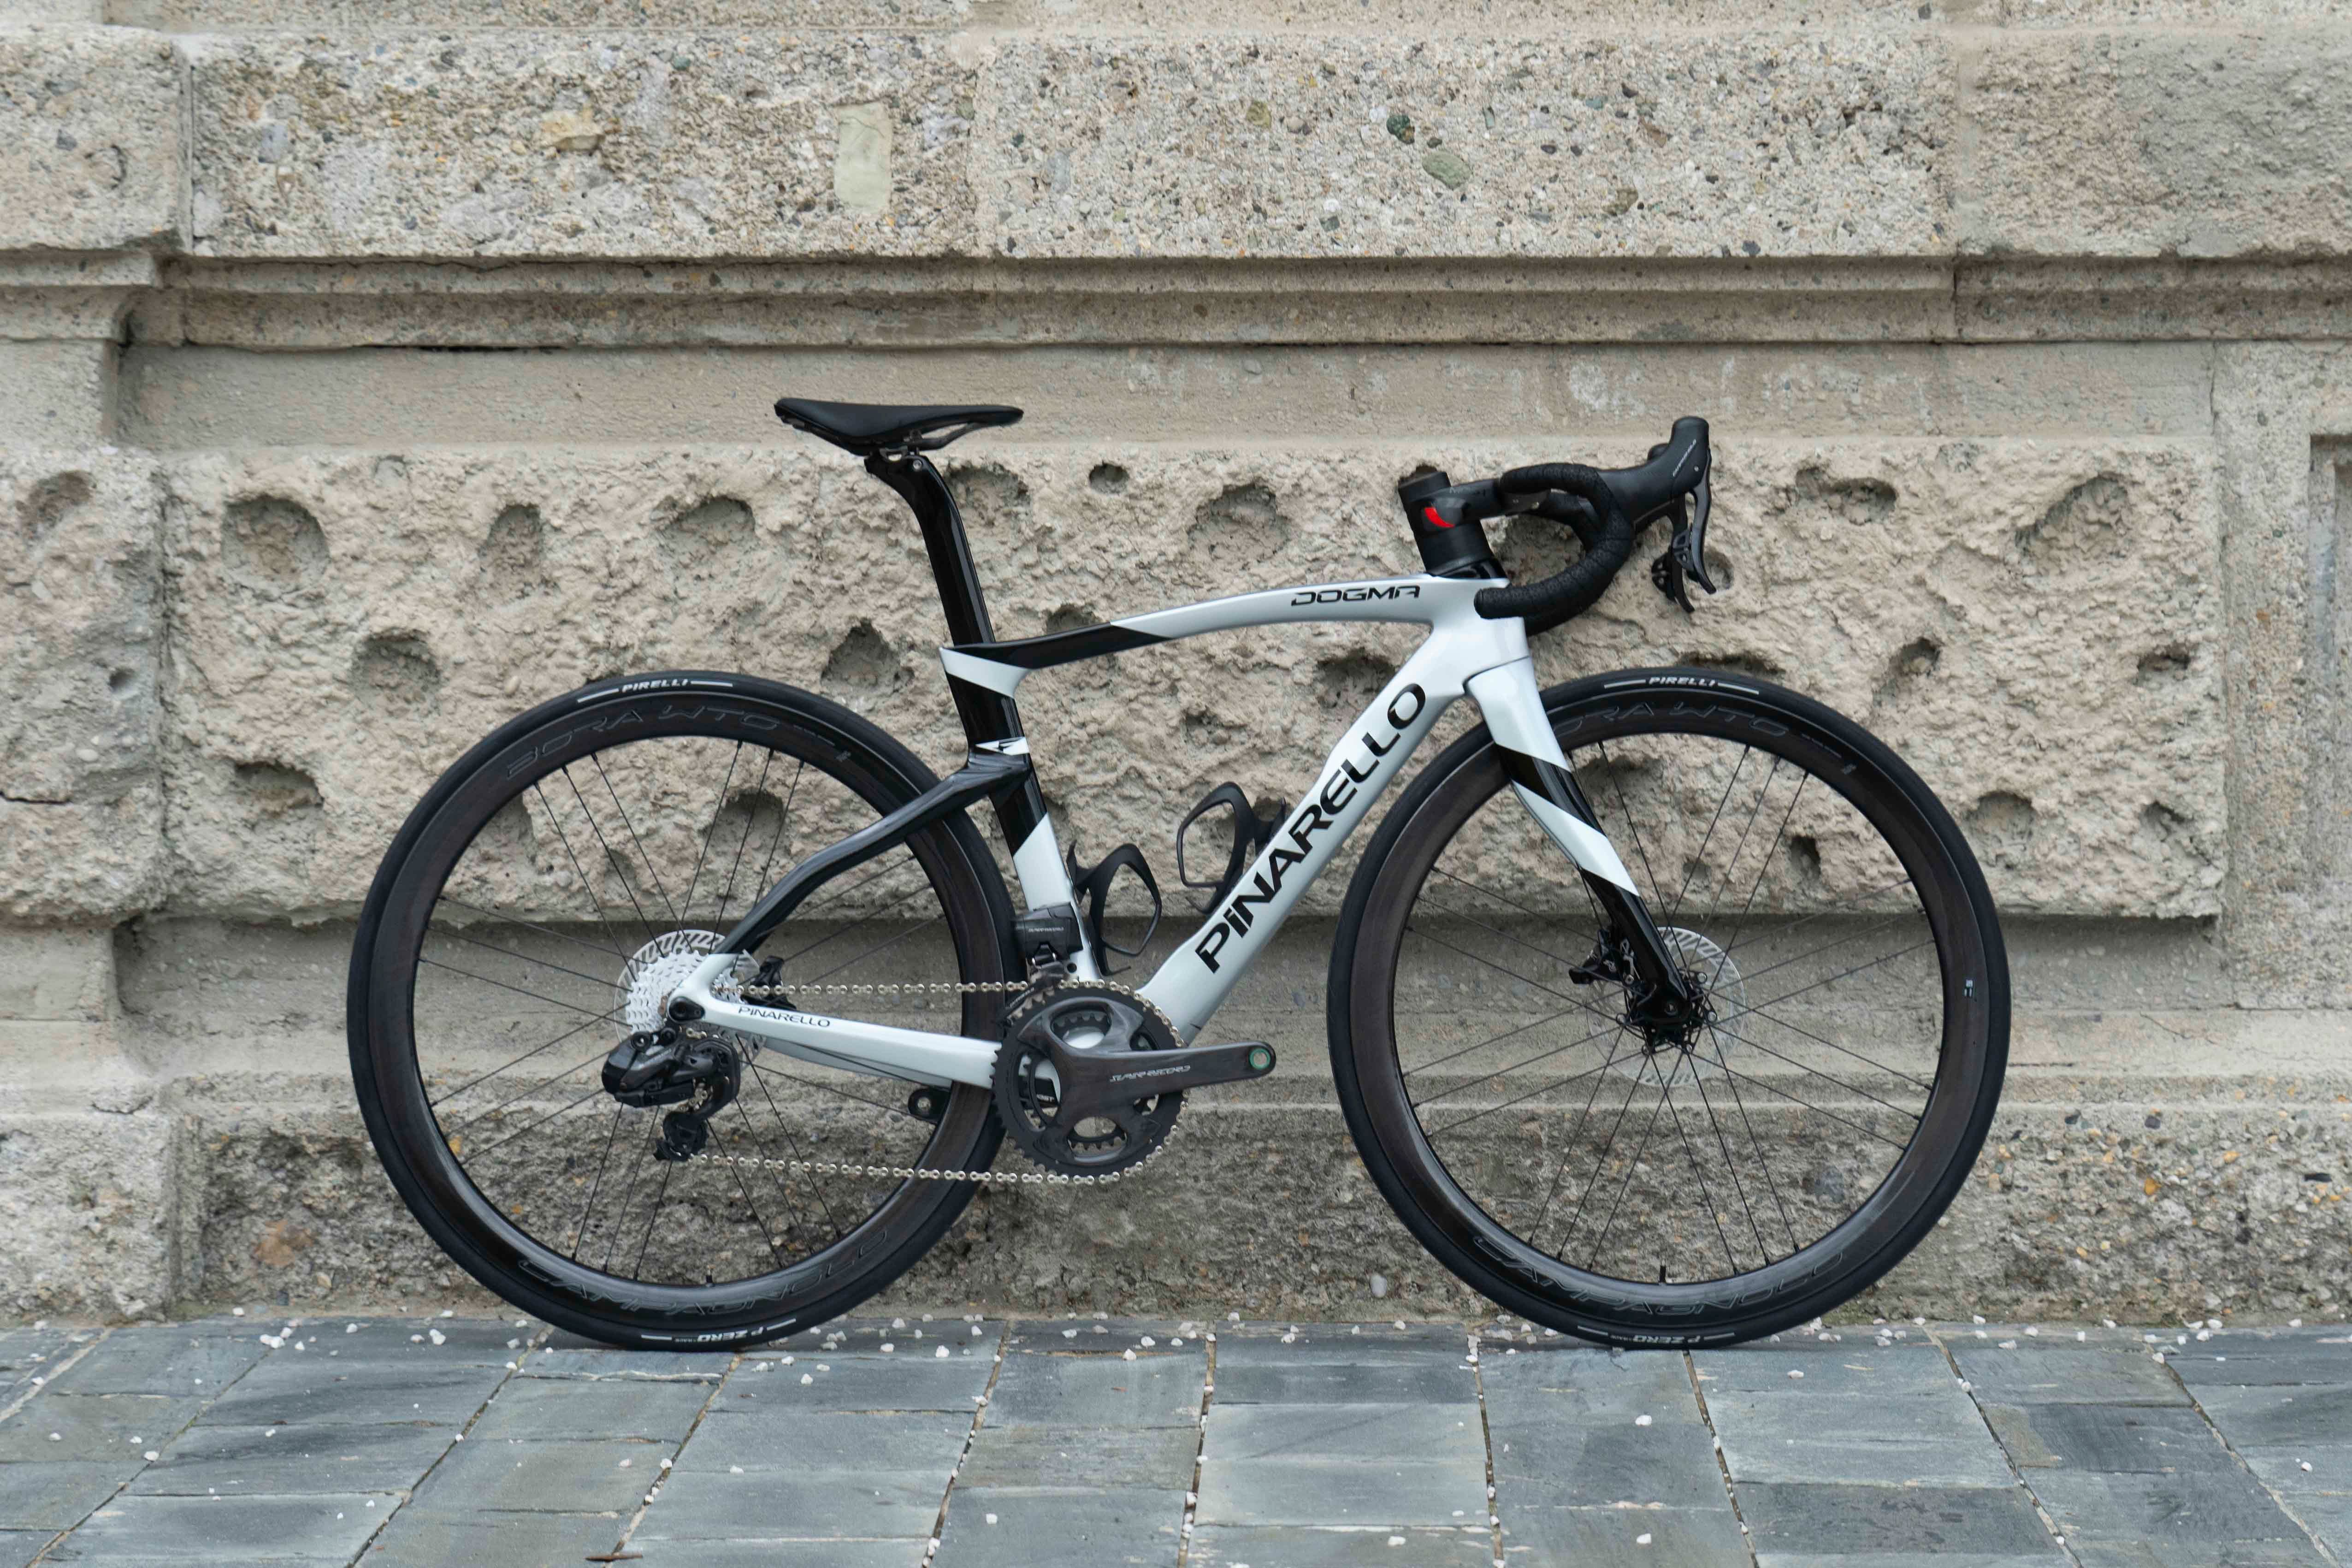 Pinarello road bike overview: range, details, pricing and